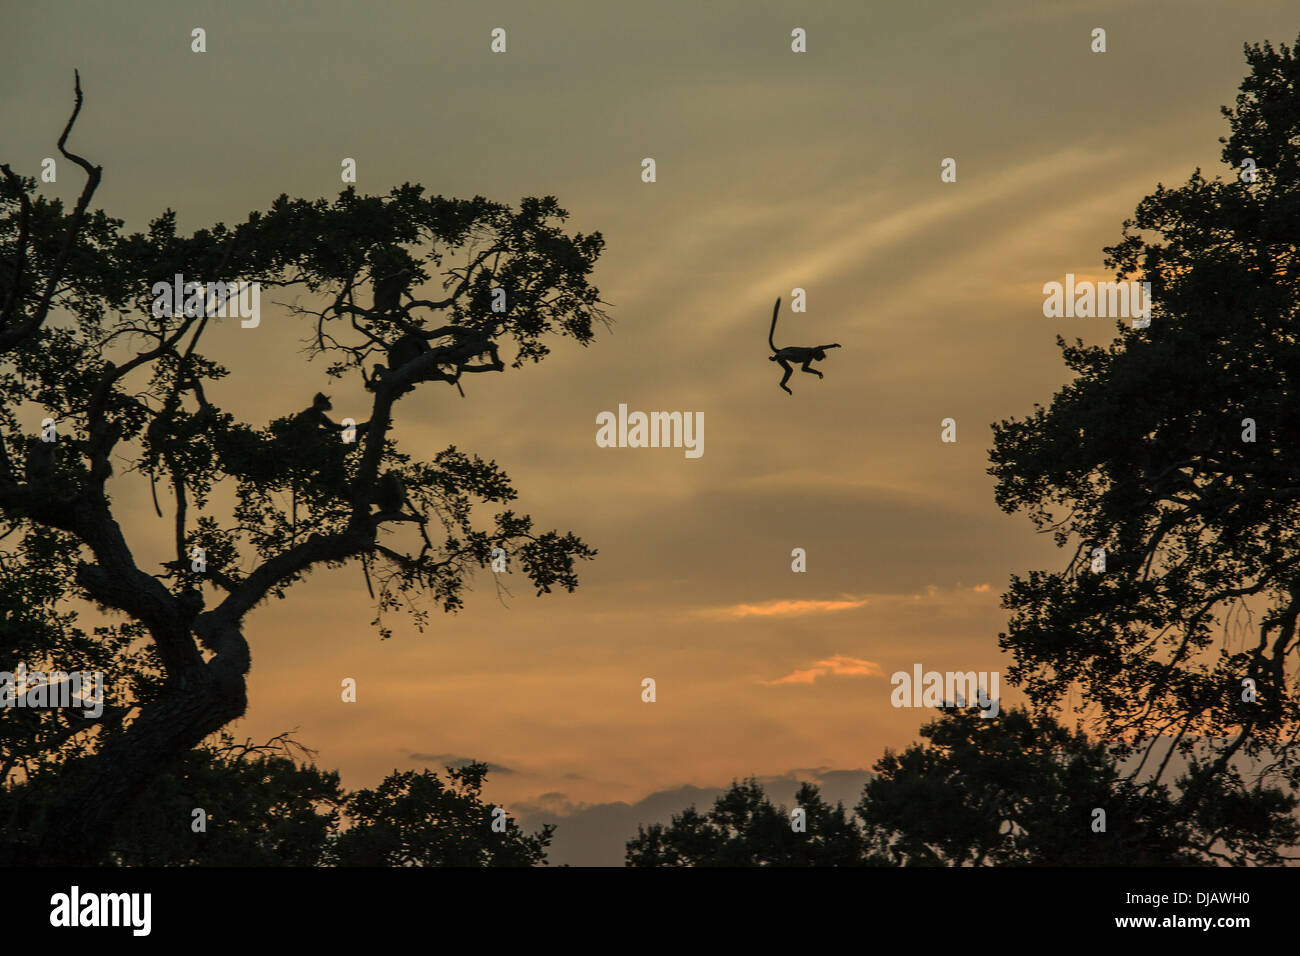 Silhouette macaque monkey jumping from tree towards tree at sunset Stock Photo